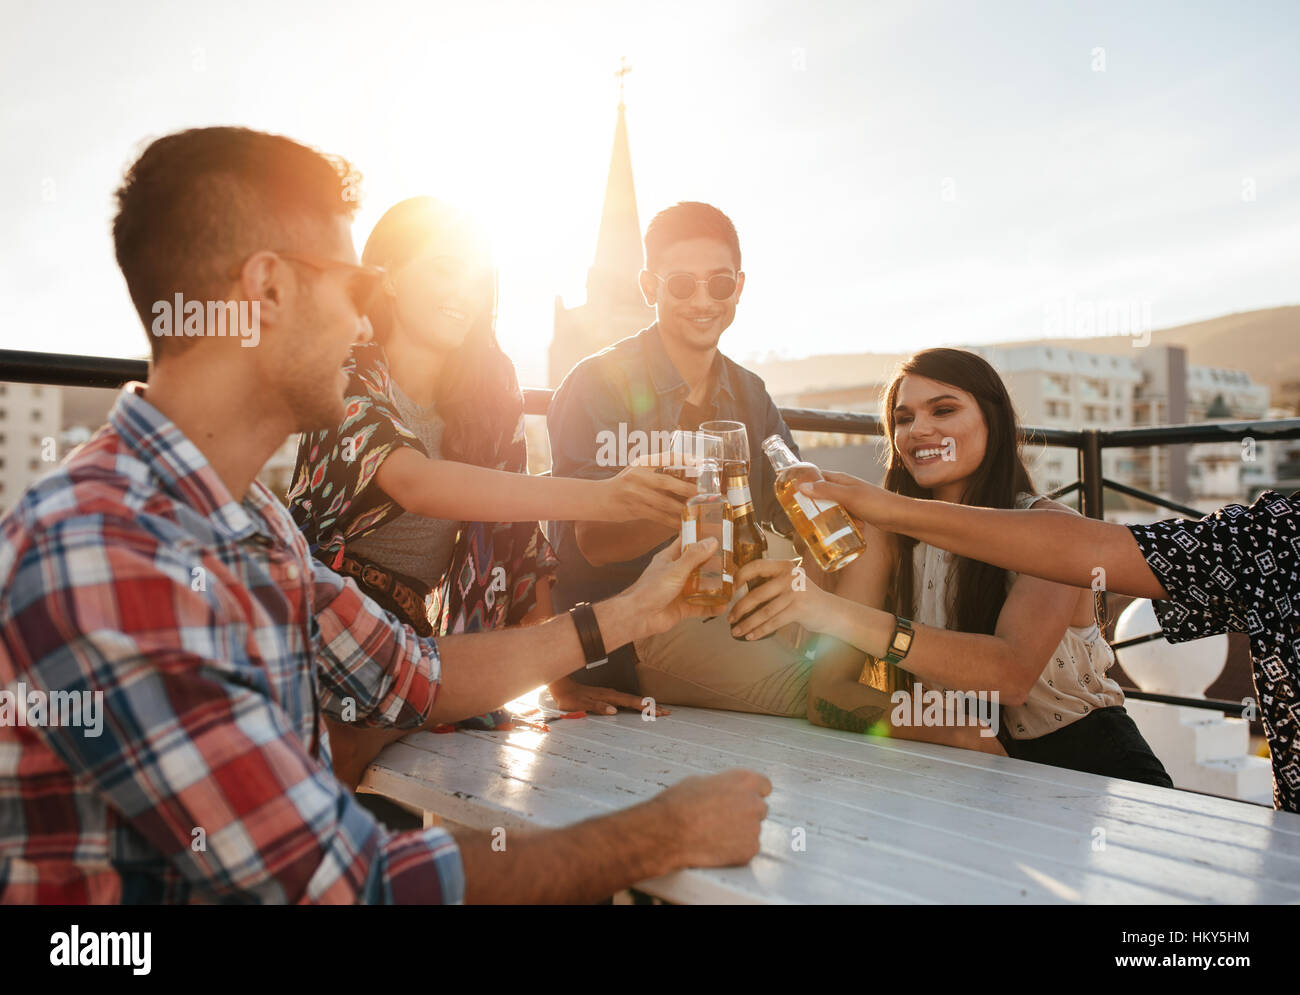 Happy young people toasting drinks at rooftop party. Young friends hanging out and enjoying with drinks. Stock Photo